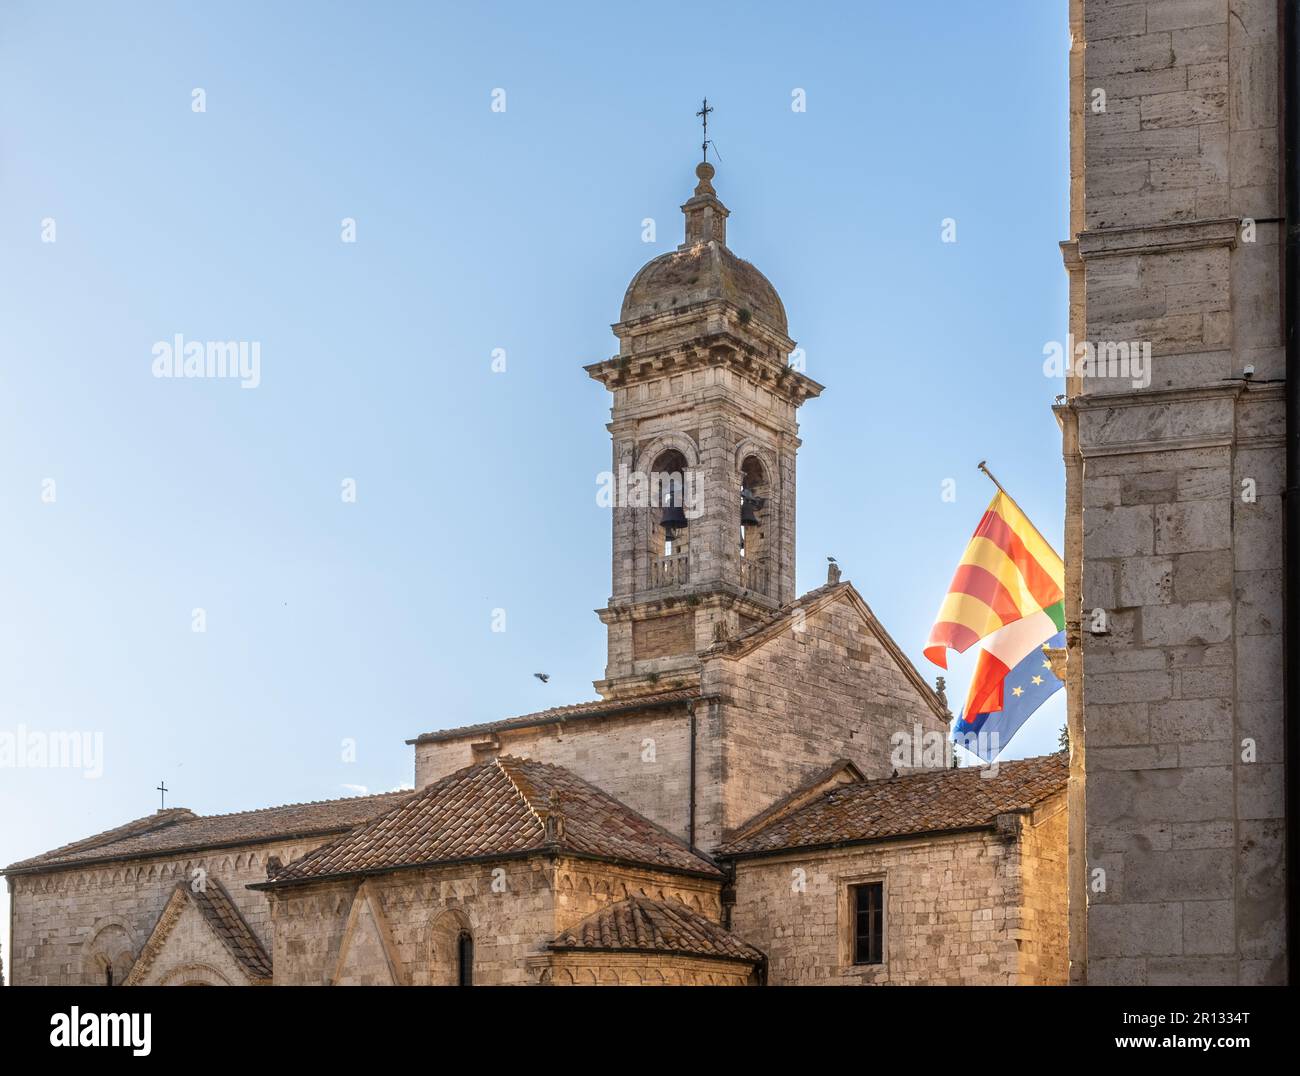 The historic Romanesque church of San Quirico d'Orcia, Tuscany region in central Italy - Europe Stock Photo